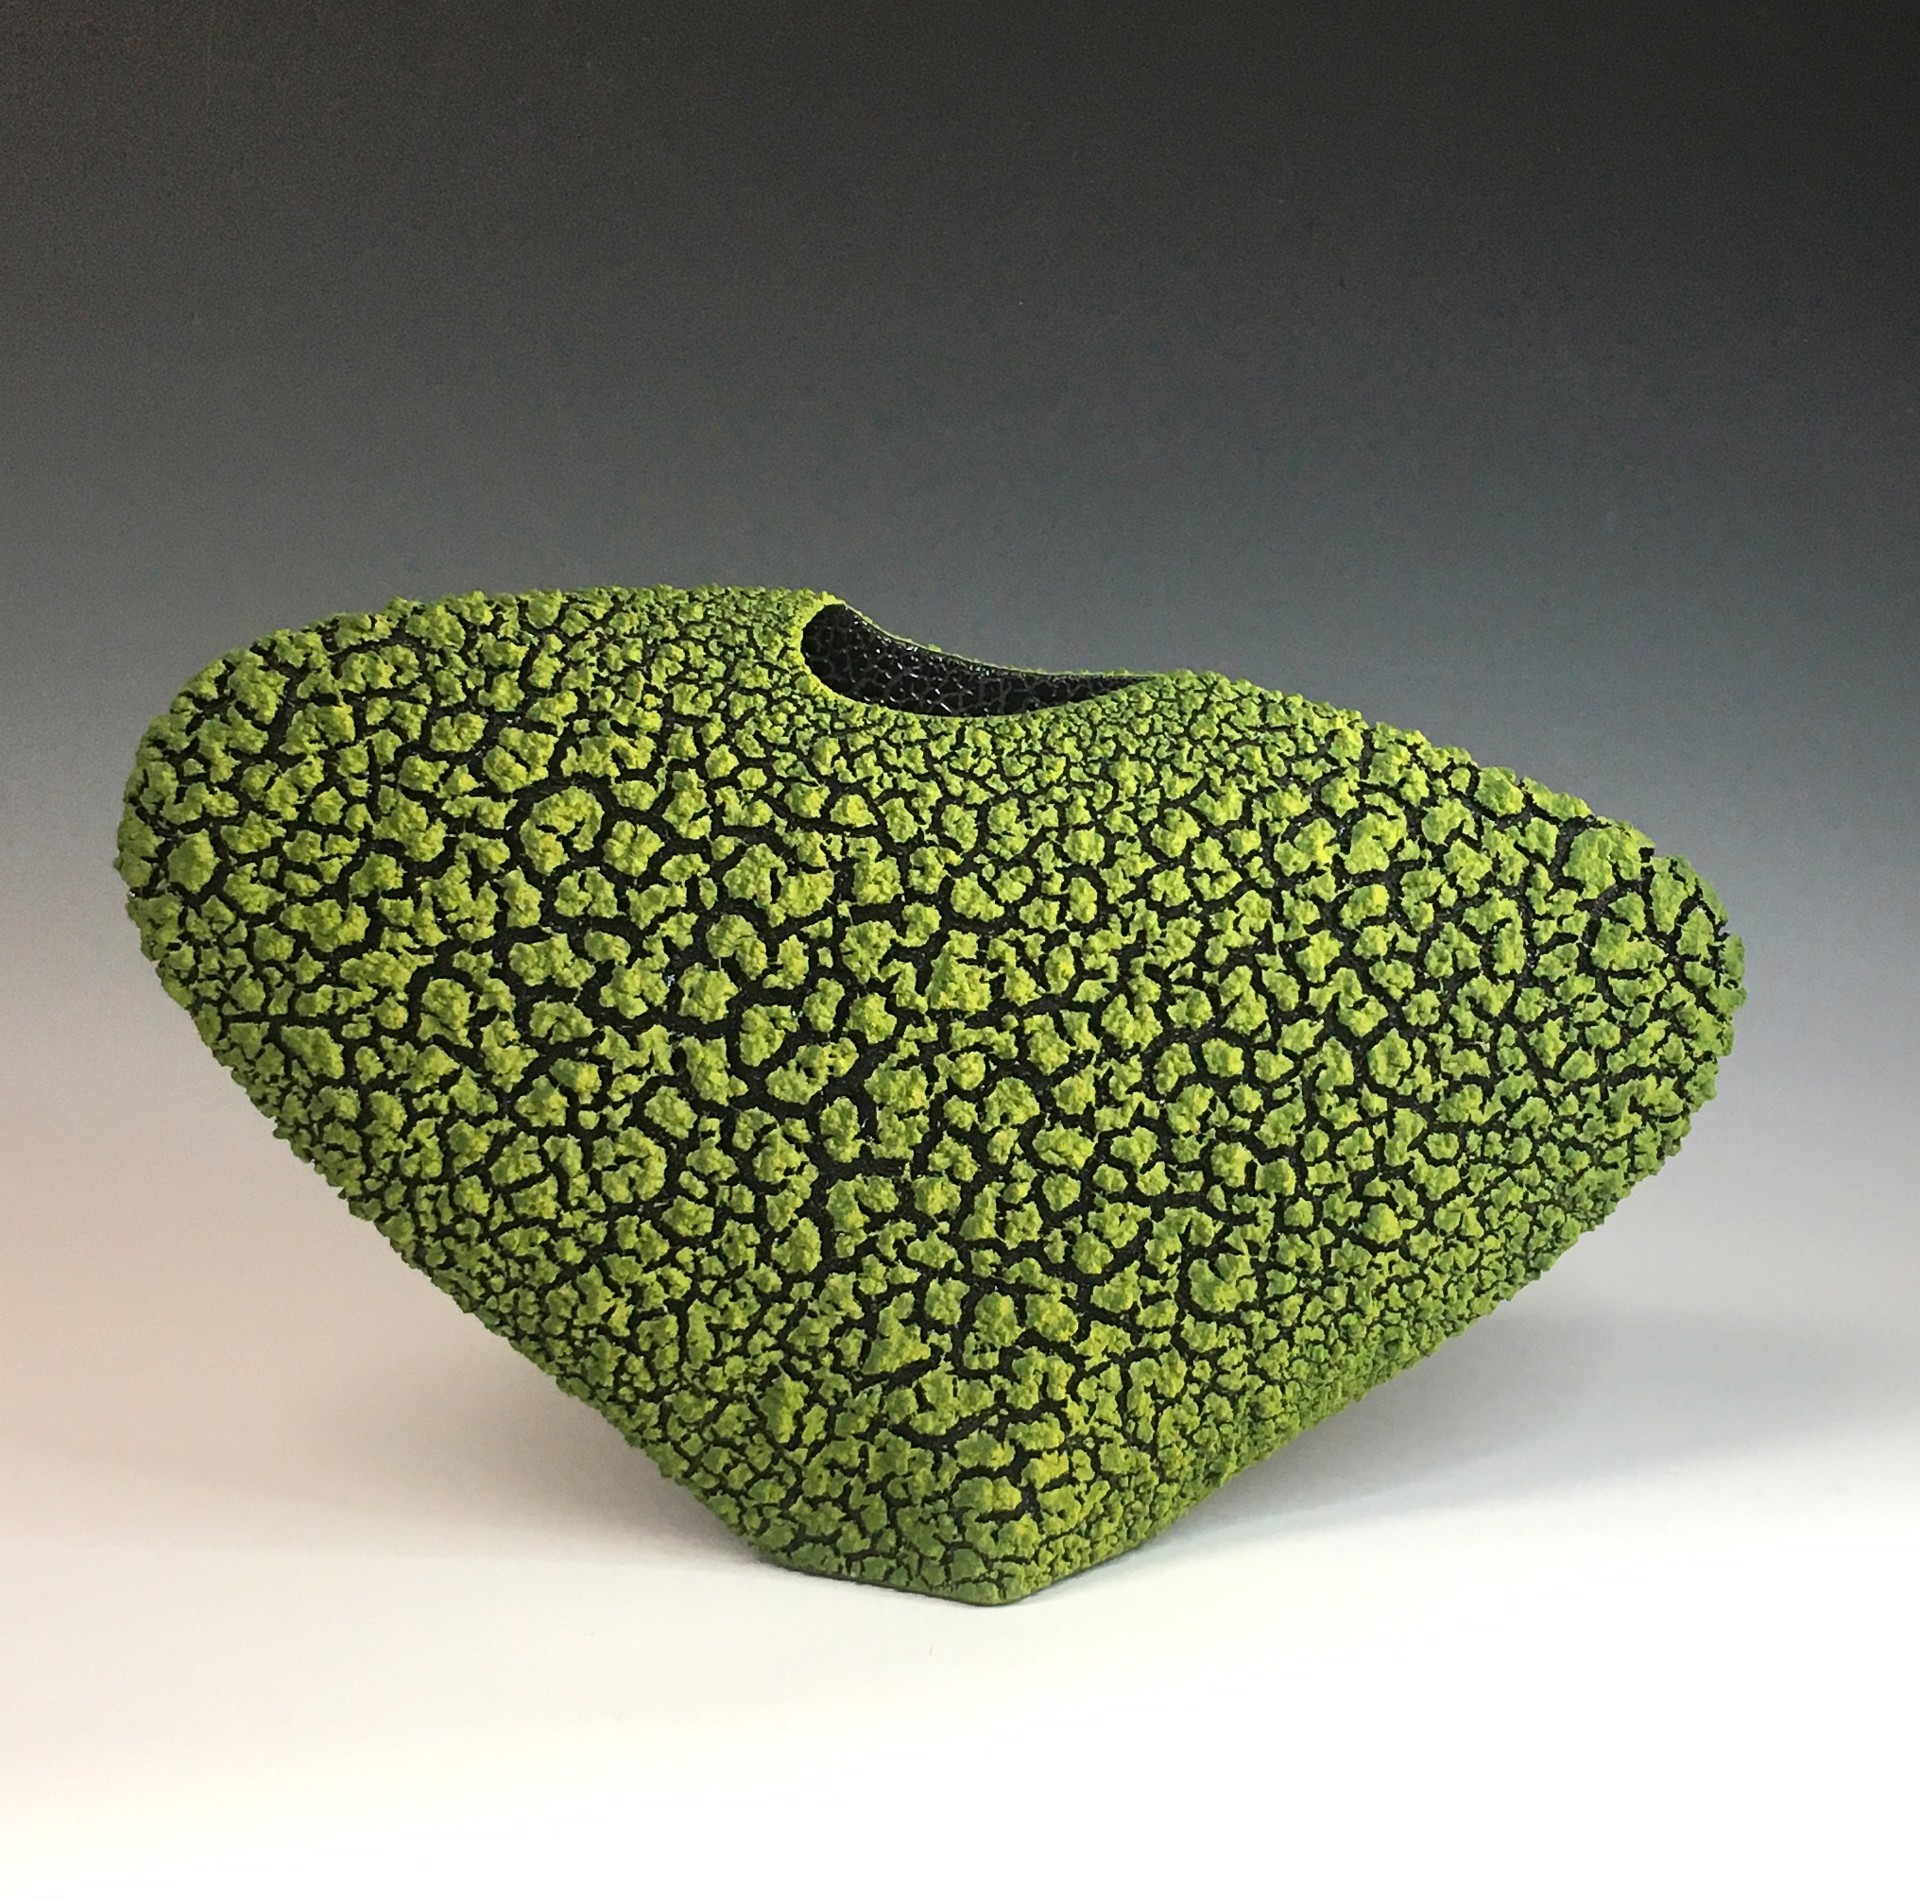 Sahara Envelope Vase ~ Lime Green (Other colors can be ordered) by Randy O'Brien